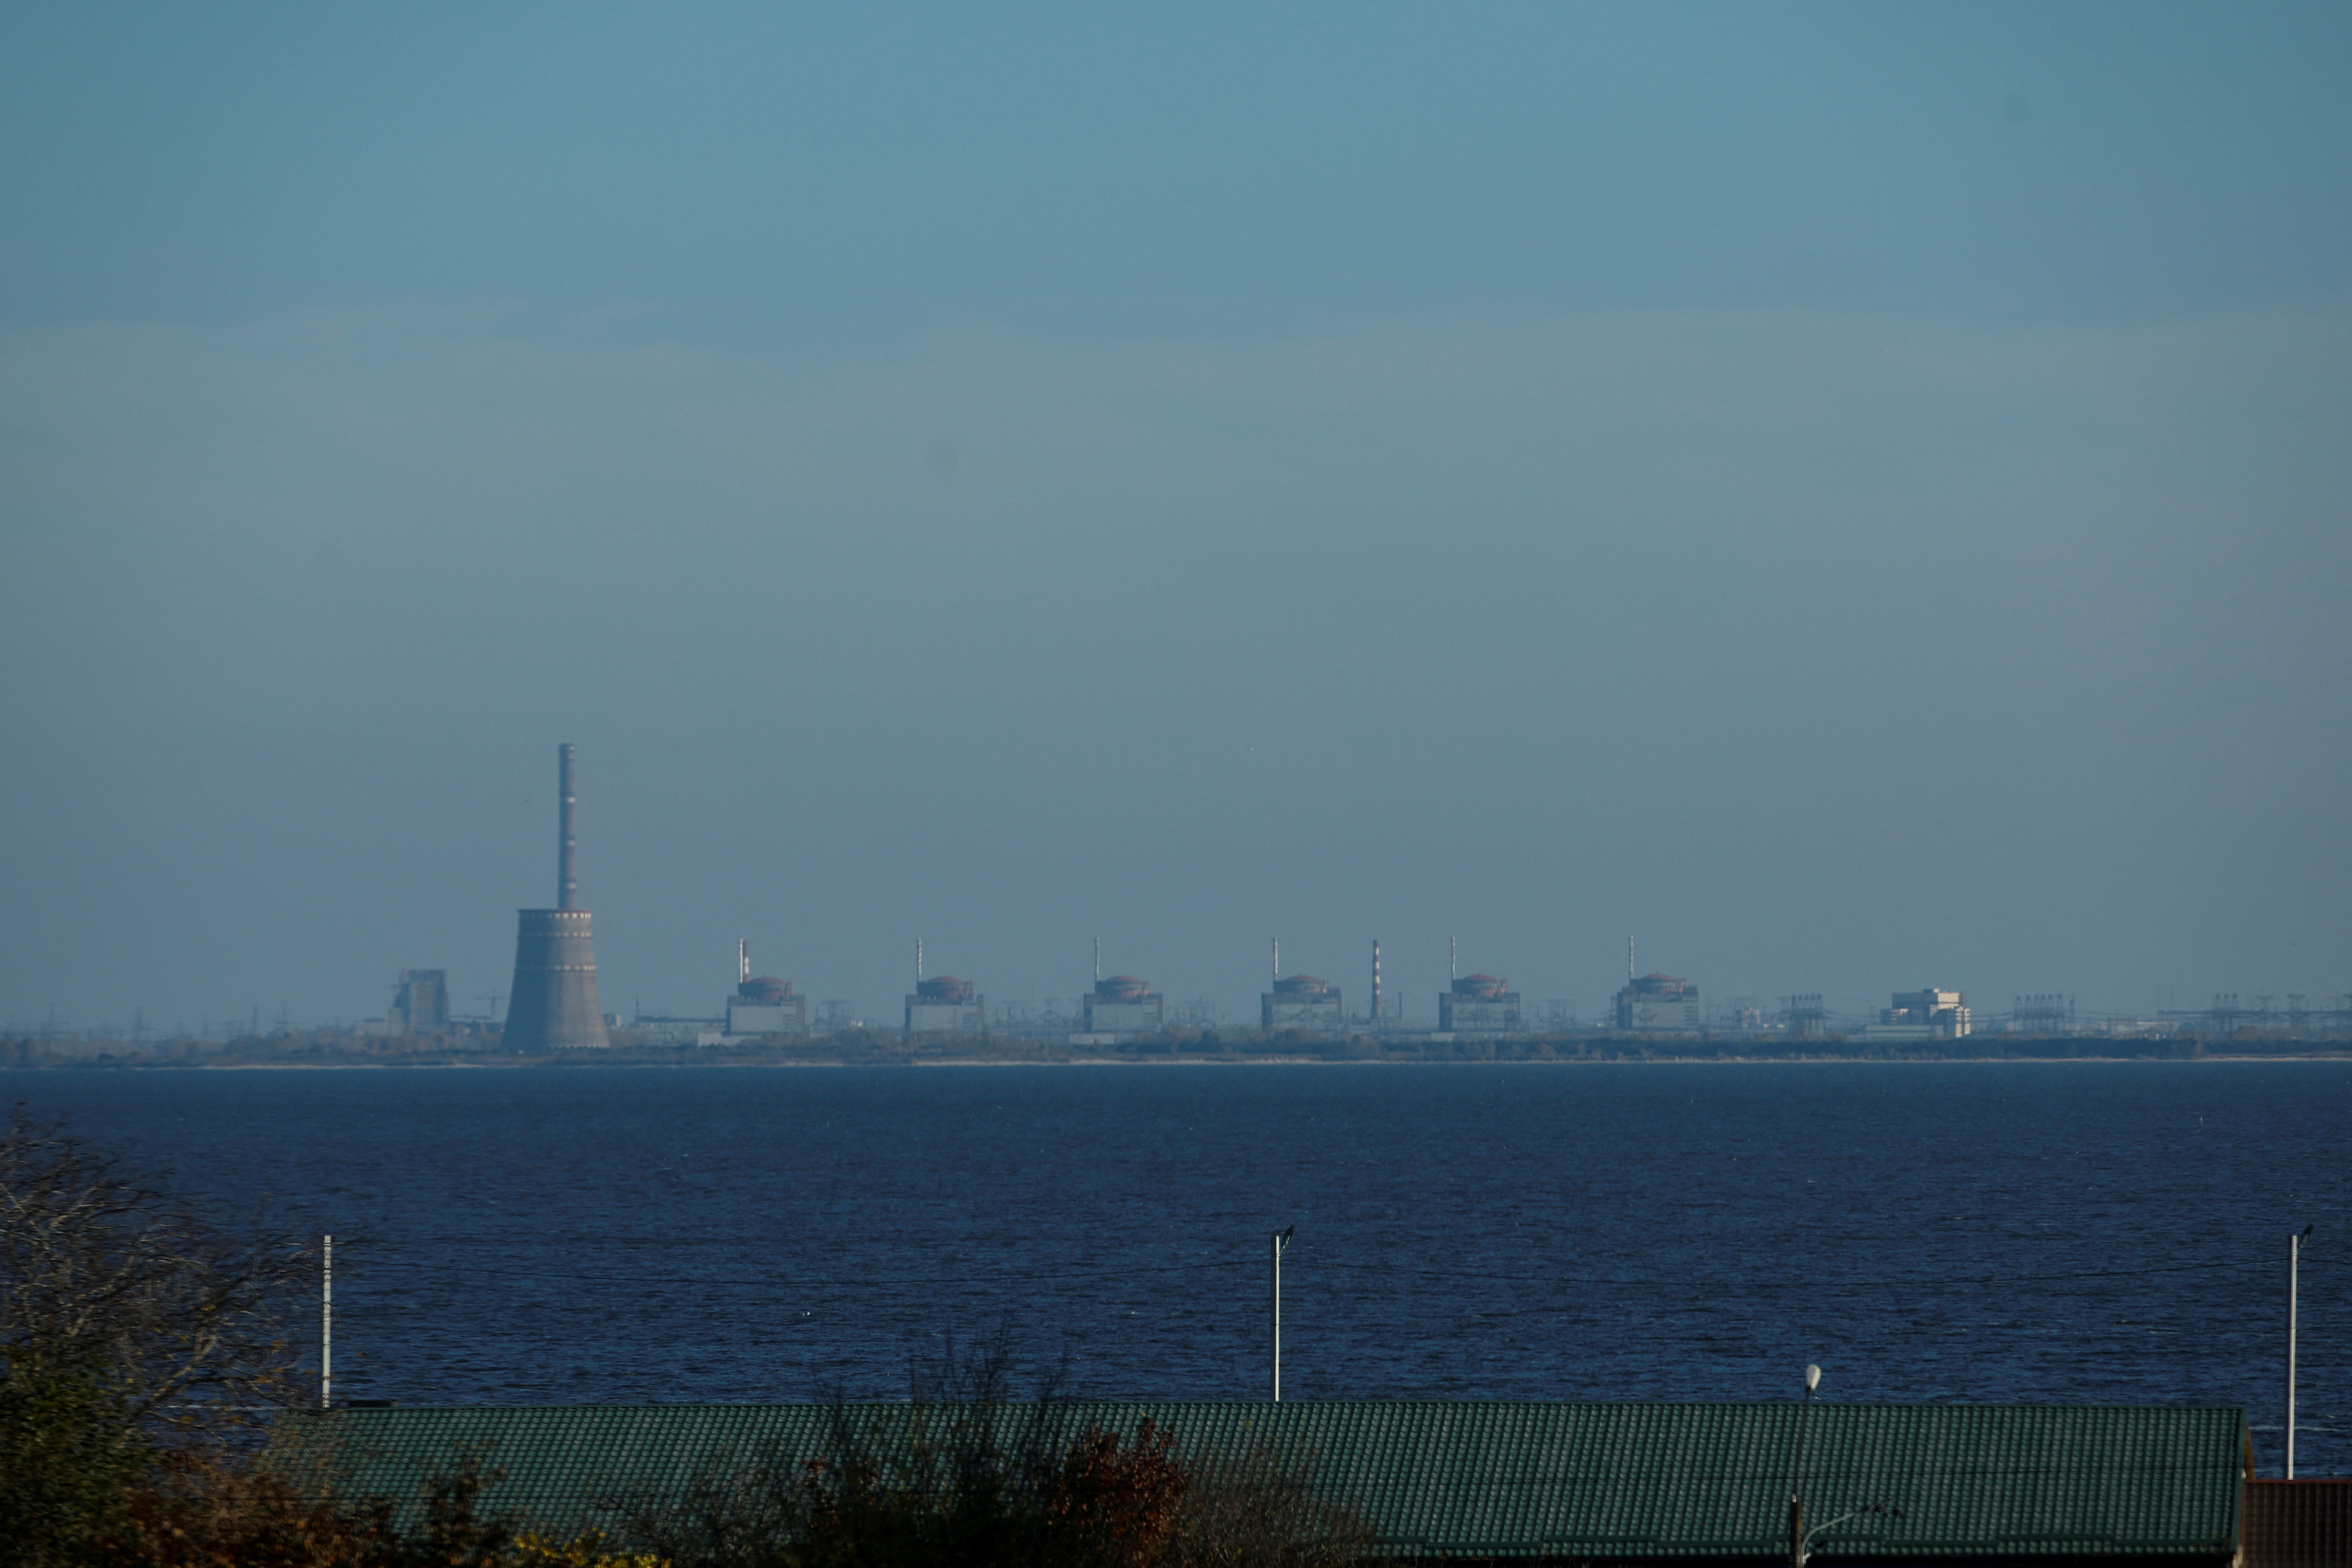 The view shows the Zaporizhzhia Nuclear Power Plant from the town of Nikopol